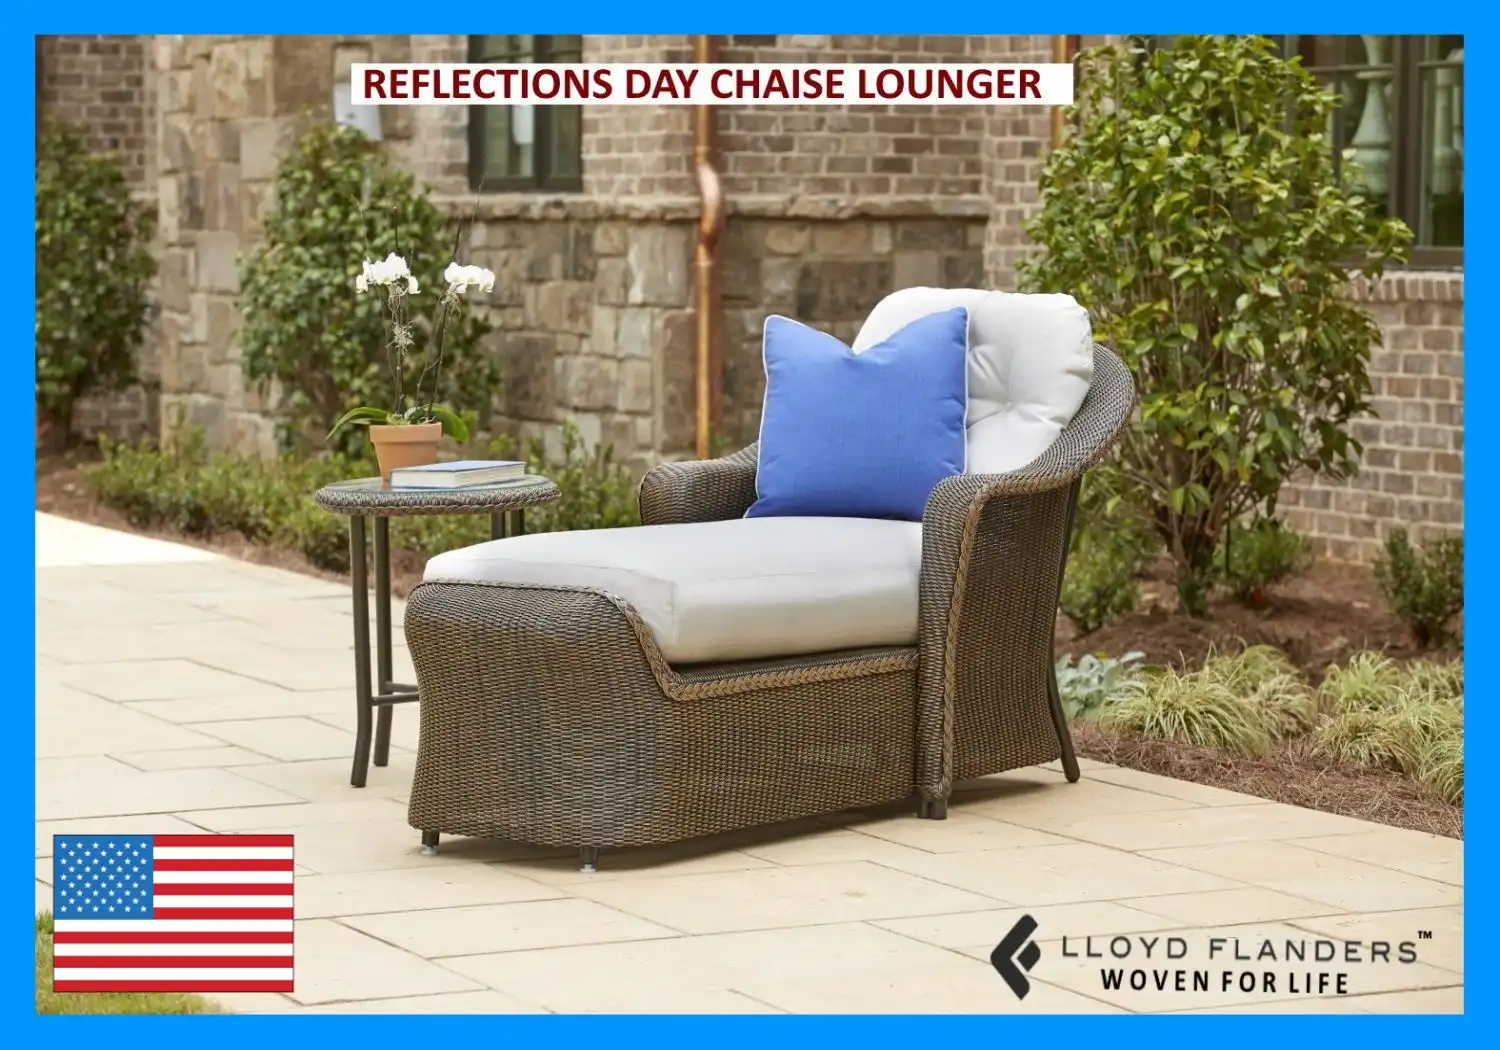 REFLECTIONS DAY CHAISE LOUNGER